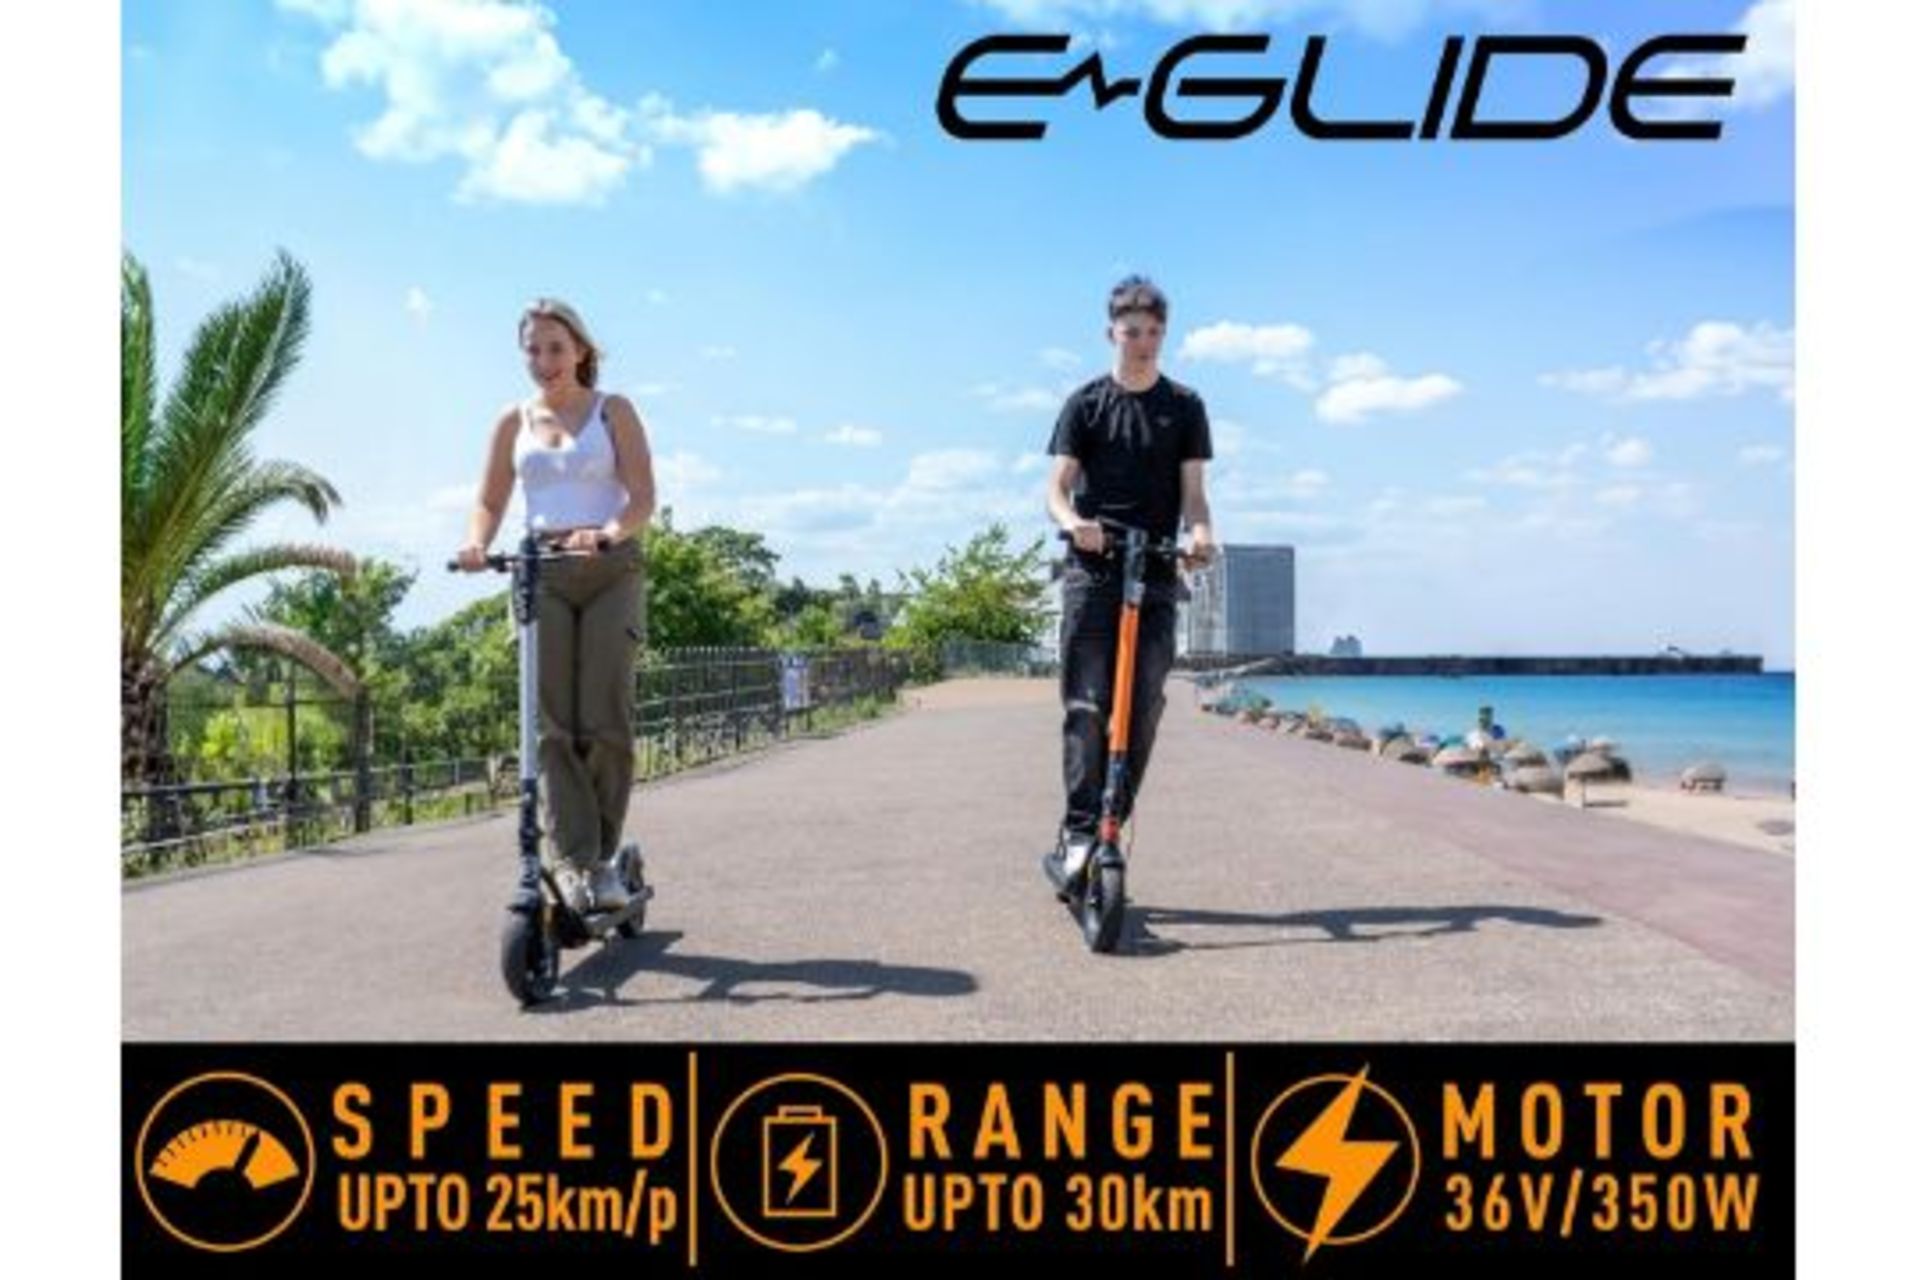 Brand New E-Glide V2 Electric Scooter Grey and Black RRP £599, Introducing a sleek and efficient - Image 3 of 5